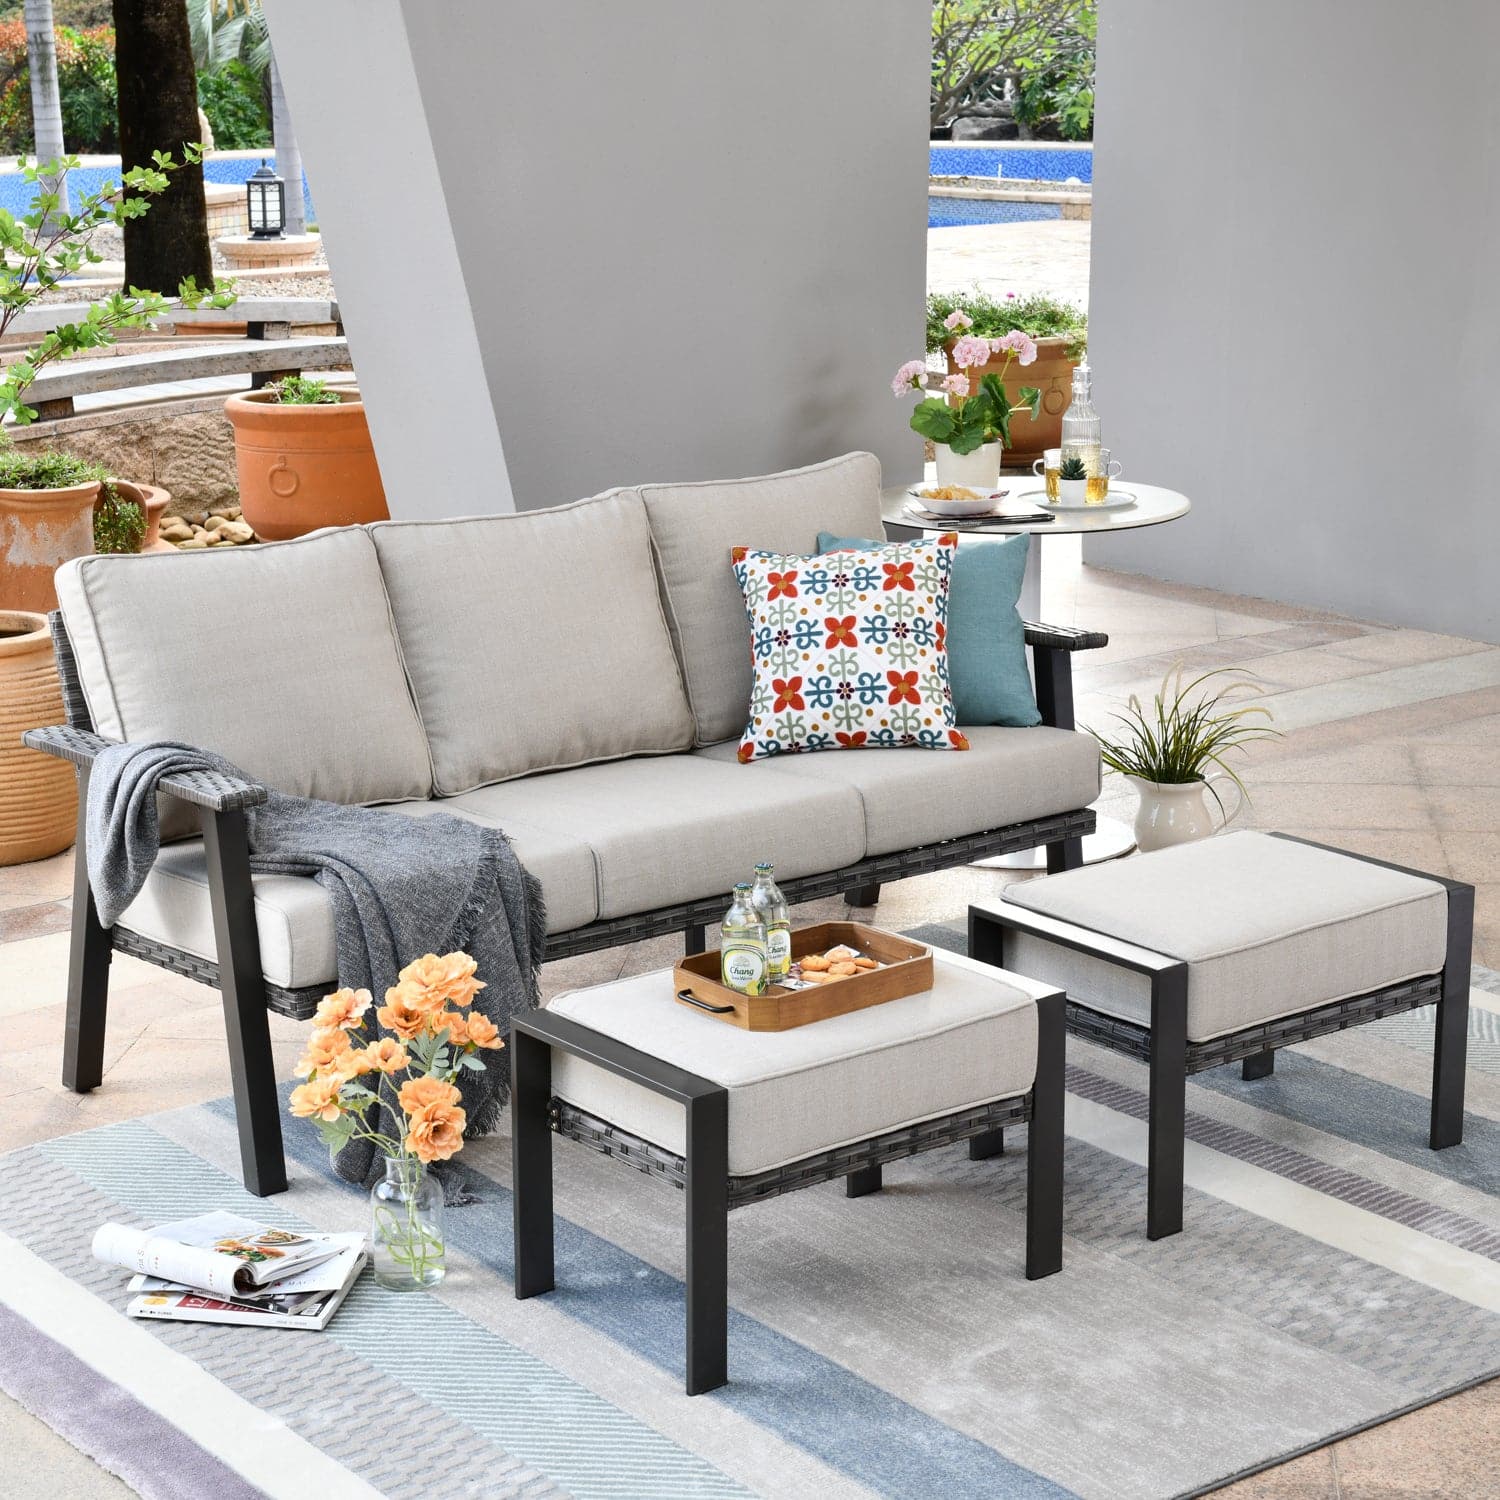 Ovios Bistro Set 3 Piece Couch with 2 Ottoman 5'' Cushion, Olefin Fabric